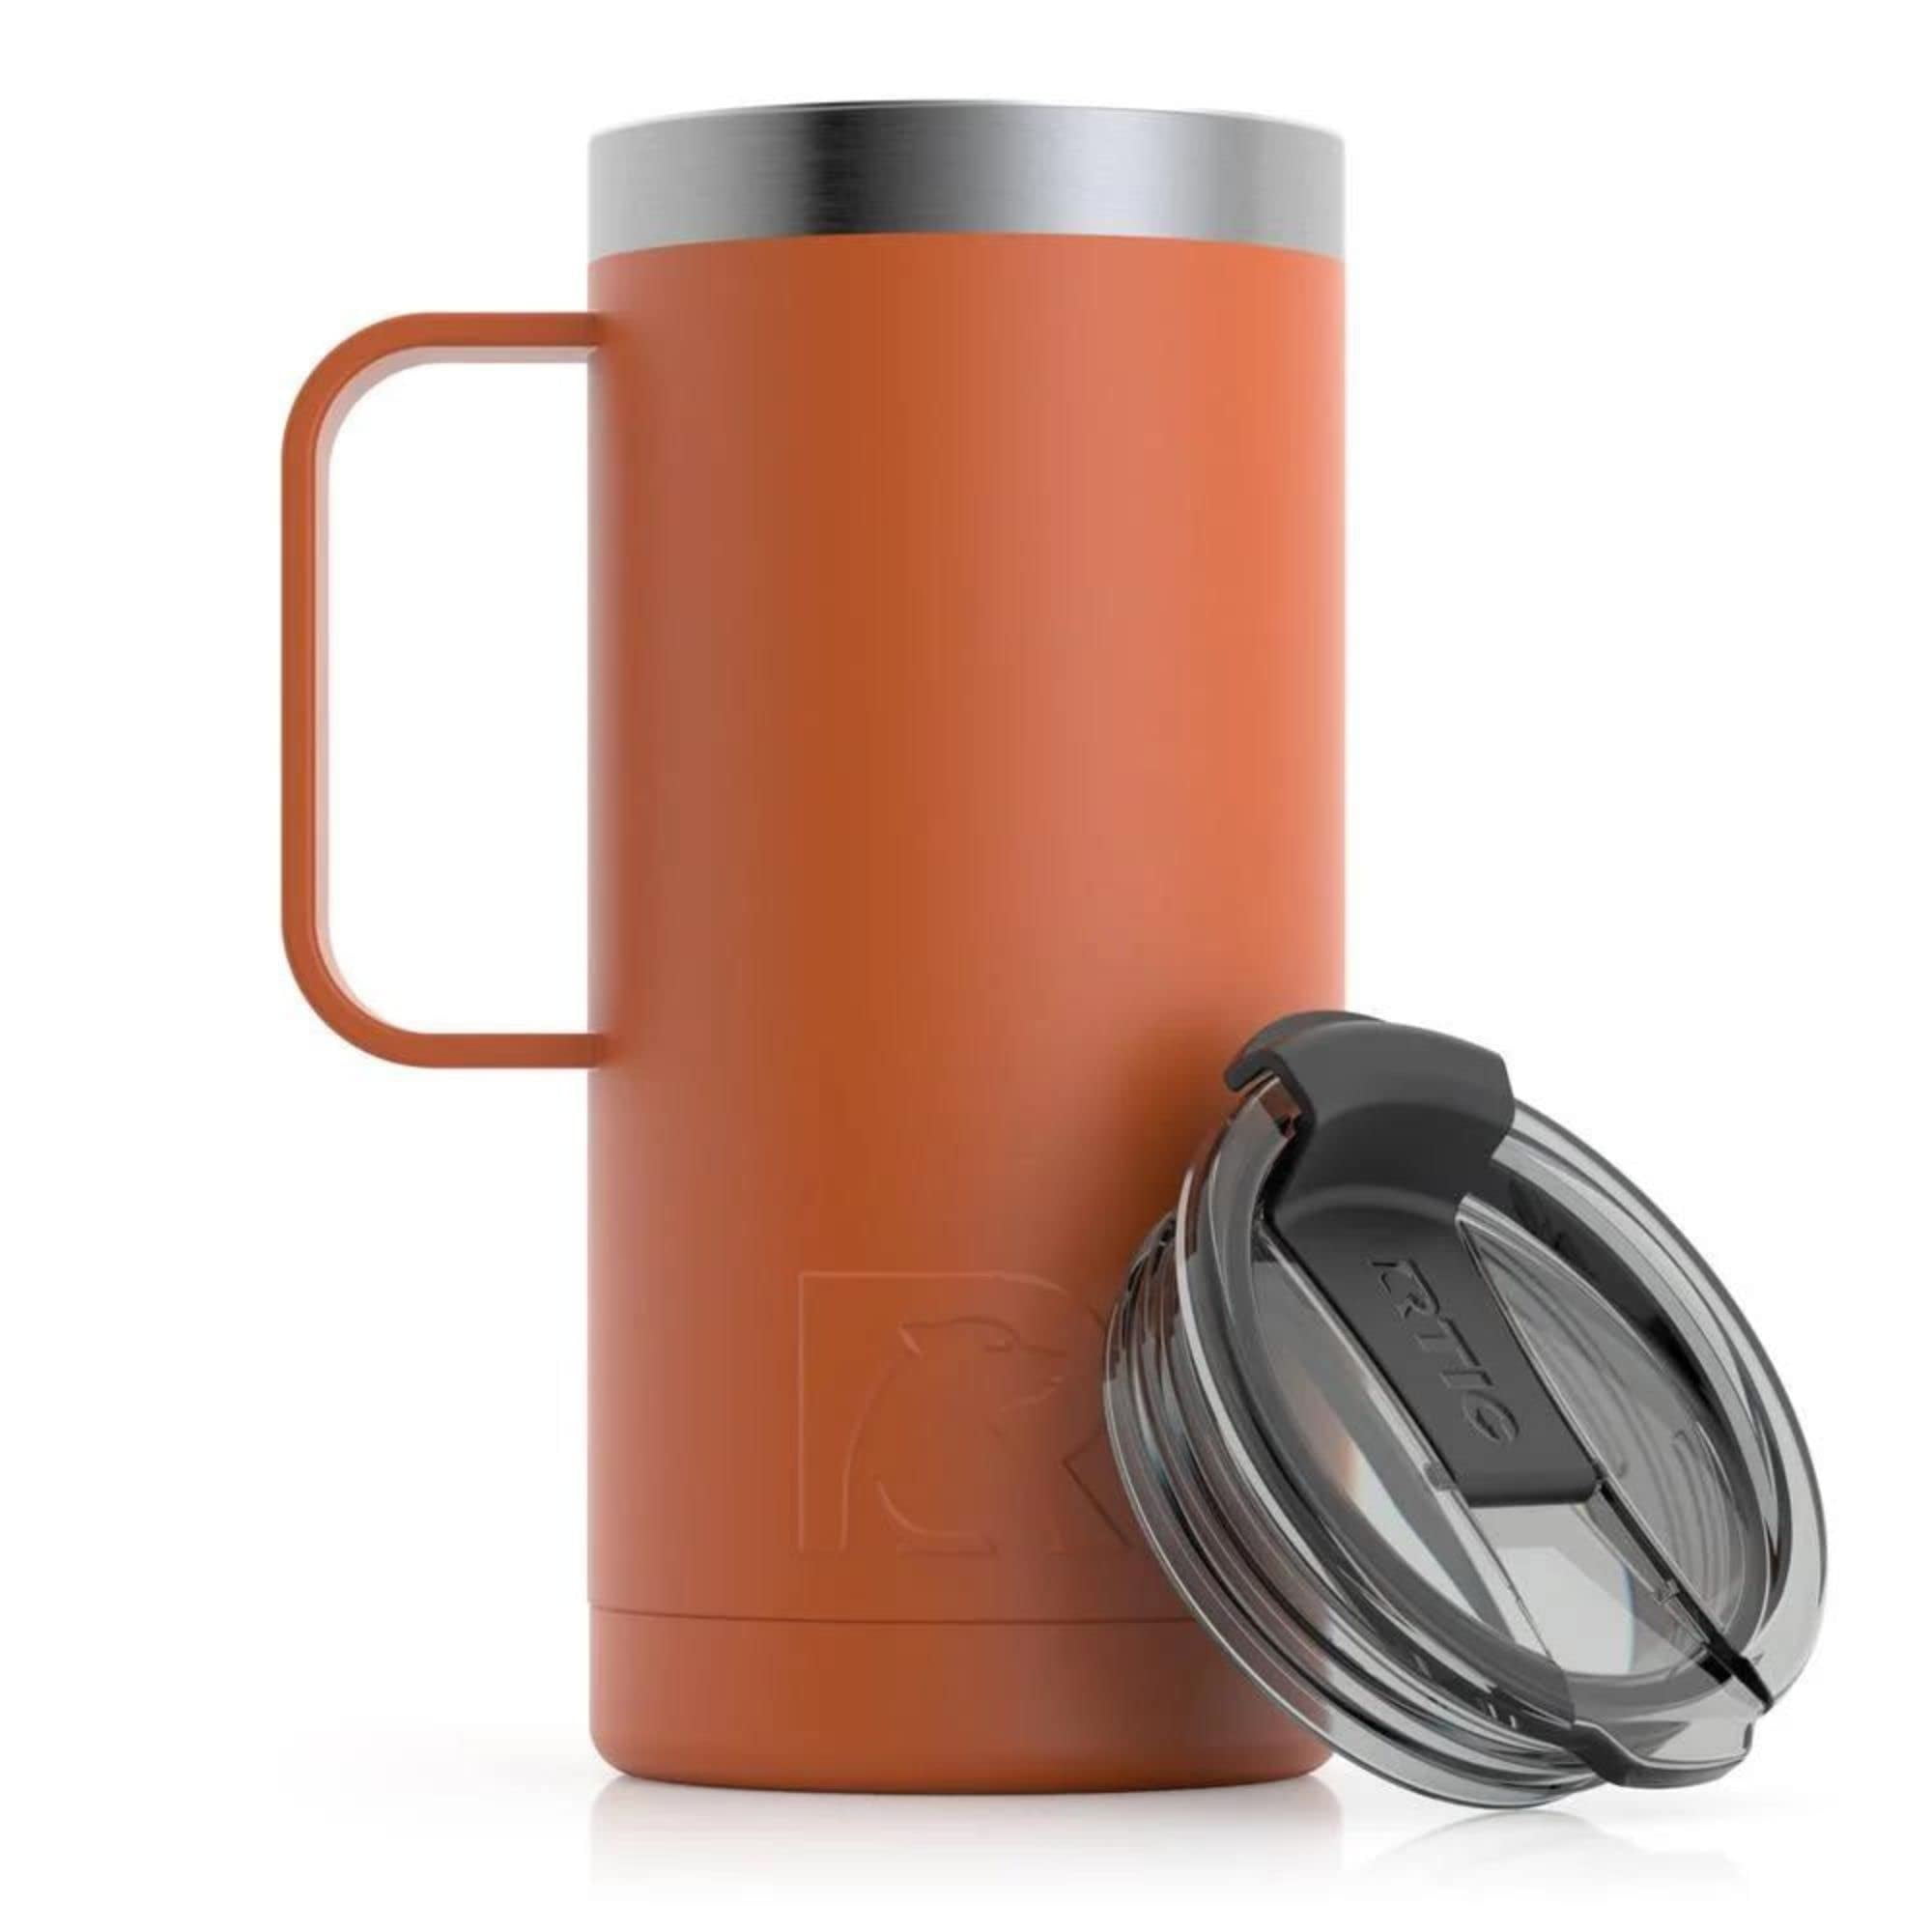 This Mug Keeps Coffee Warm (Not Piping Hot) For Hours On End